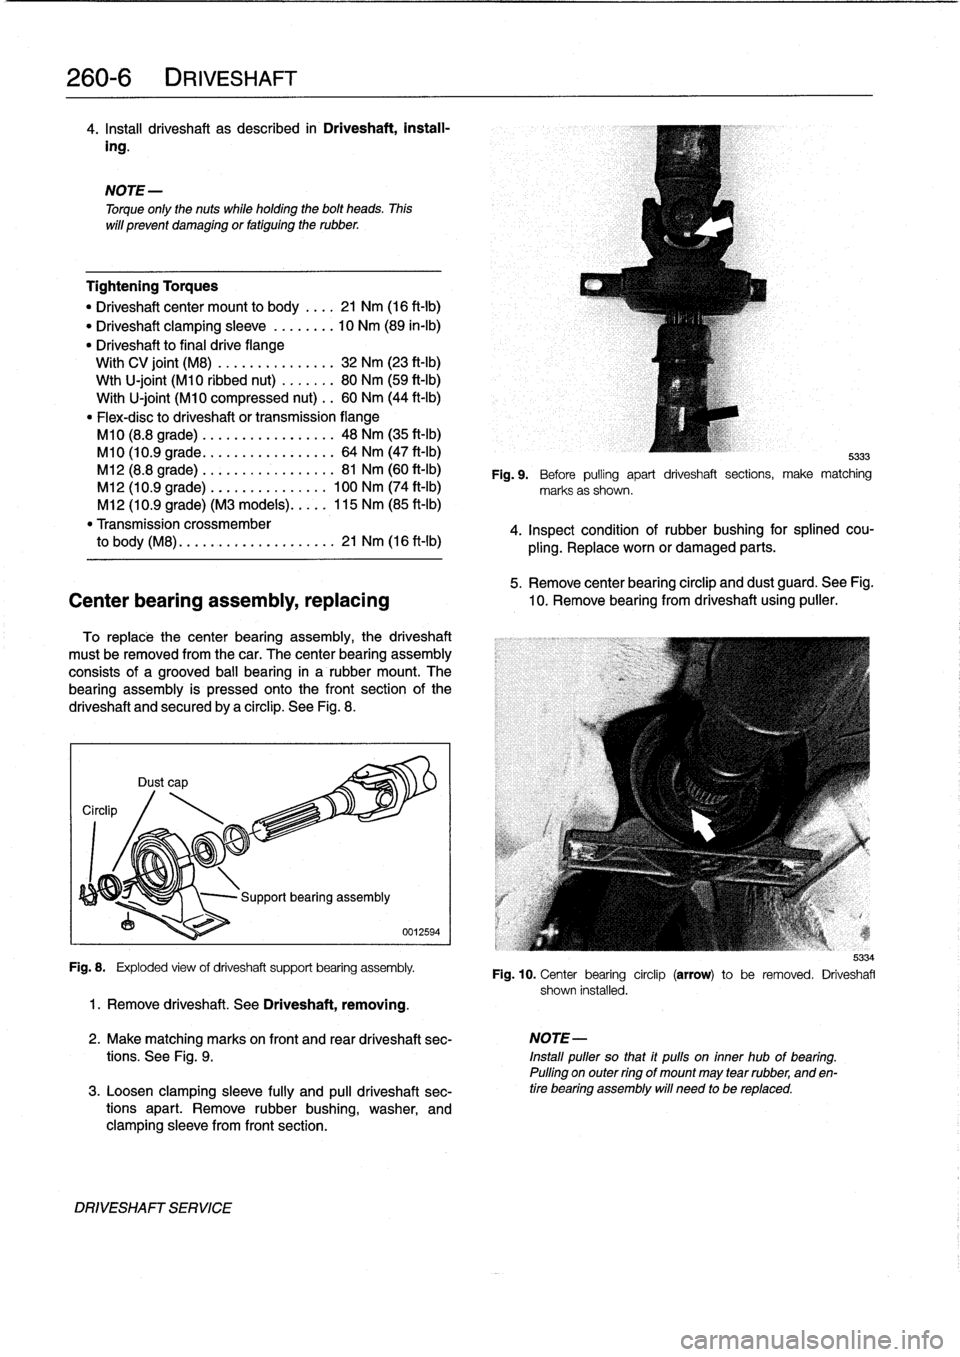 BMW 325i 1998 E36 Workshop Manual 
260-
6
DRIVESHAFT

4
.
Insta¡¡
driveshaft
as
described
in
Driveshaft,
install-

ing
.

Tightening
Torques

"
Driveshaft
center
mount
to
body
.
...
21
Nm
(16
ft-Ib)

"
Driveshaft
clamping
sleeve
...